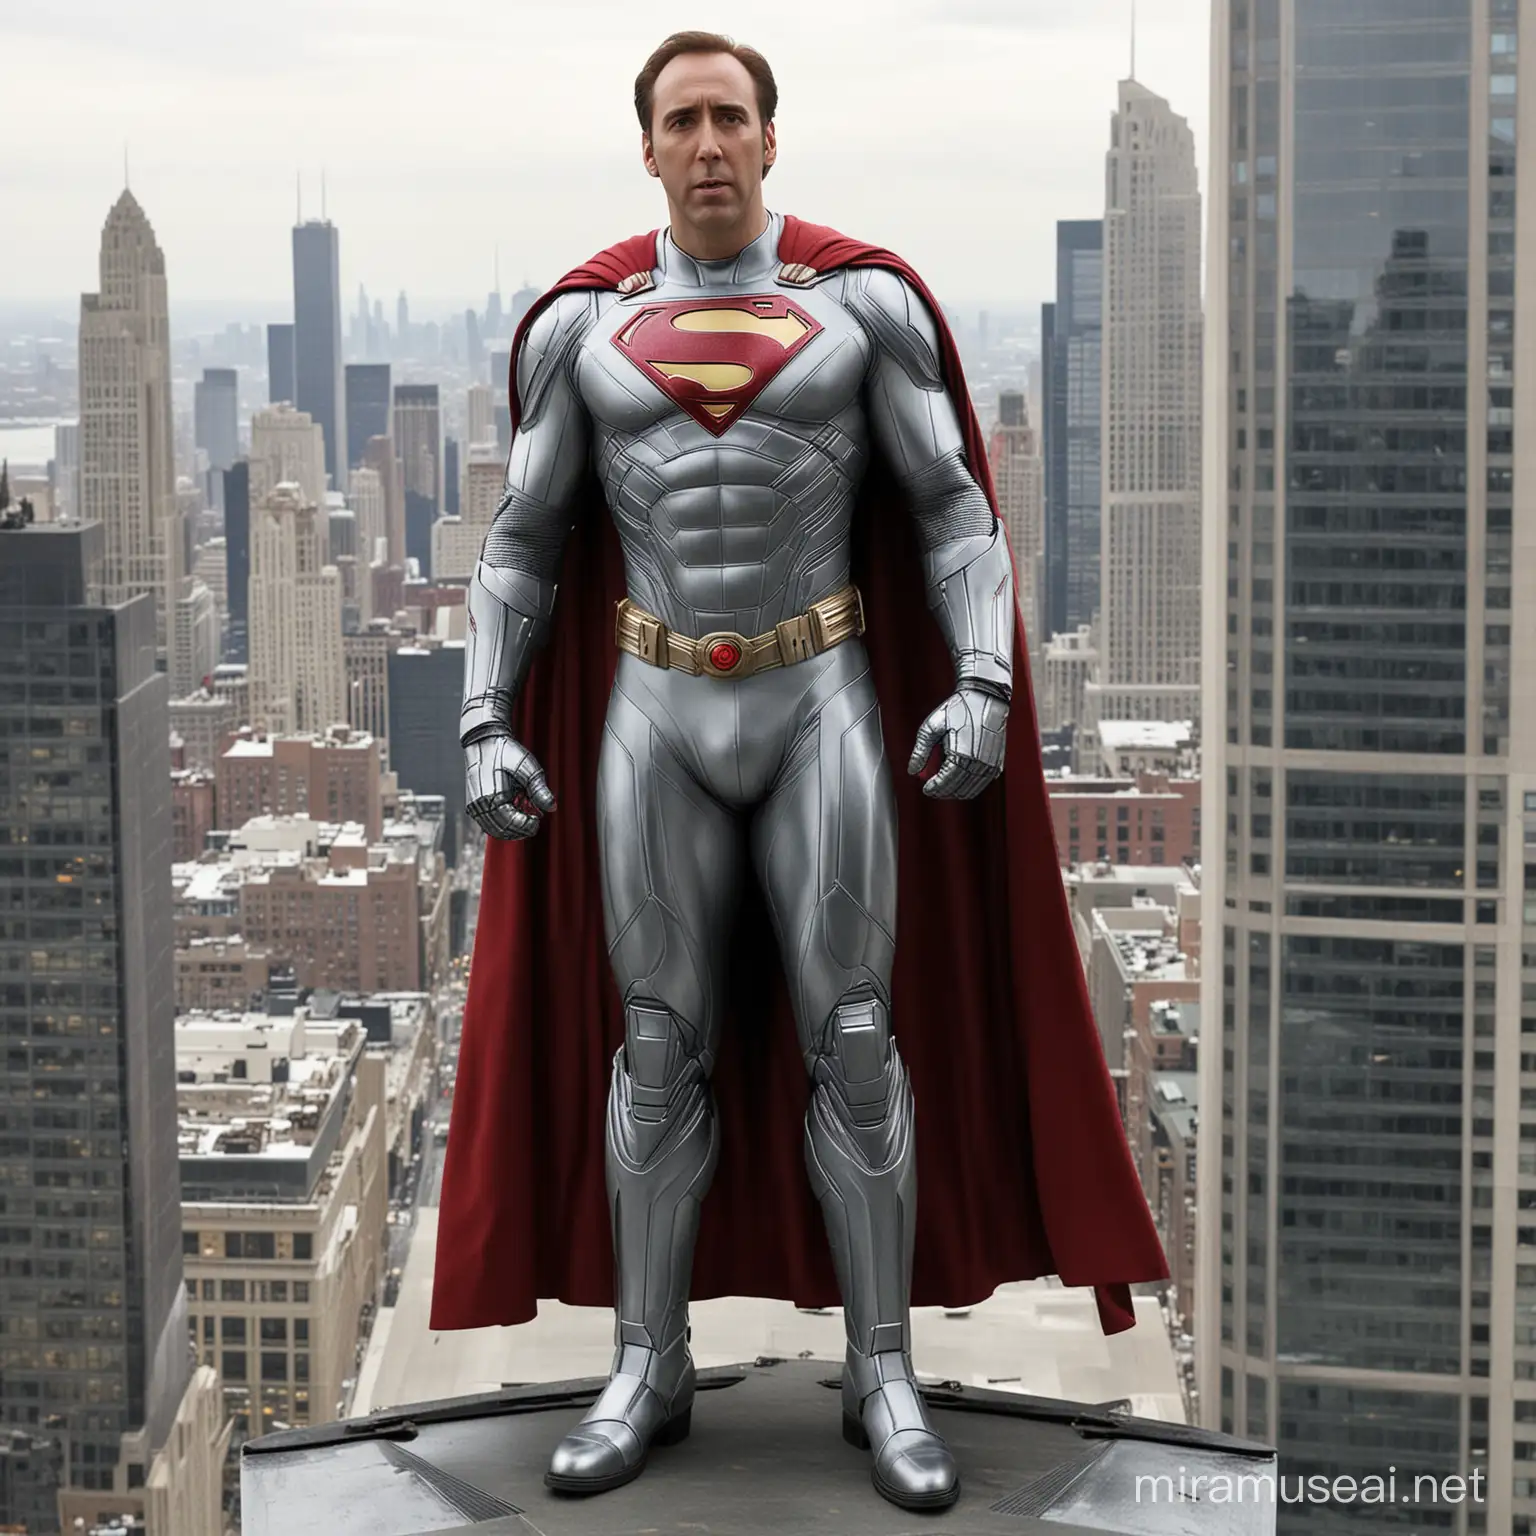 Bald Nicolas Cage as Lex Luthor in Armored Superman Suit atop Daily Planet Building